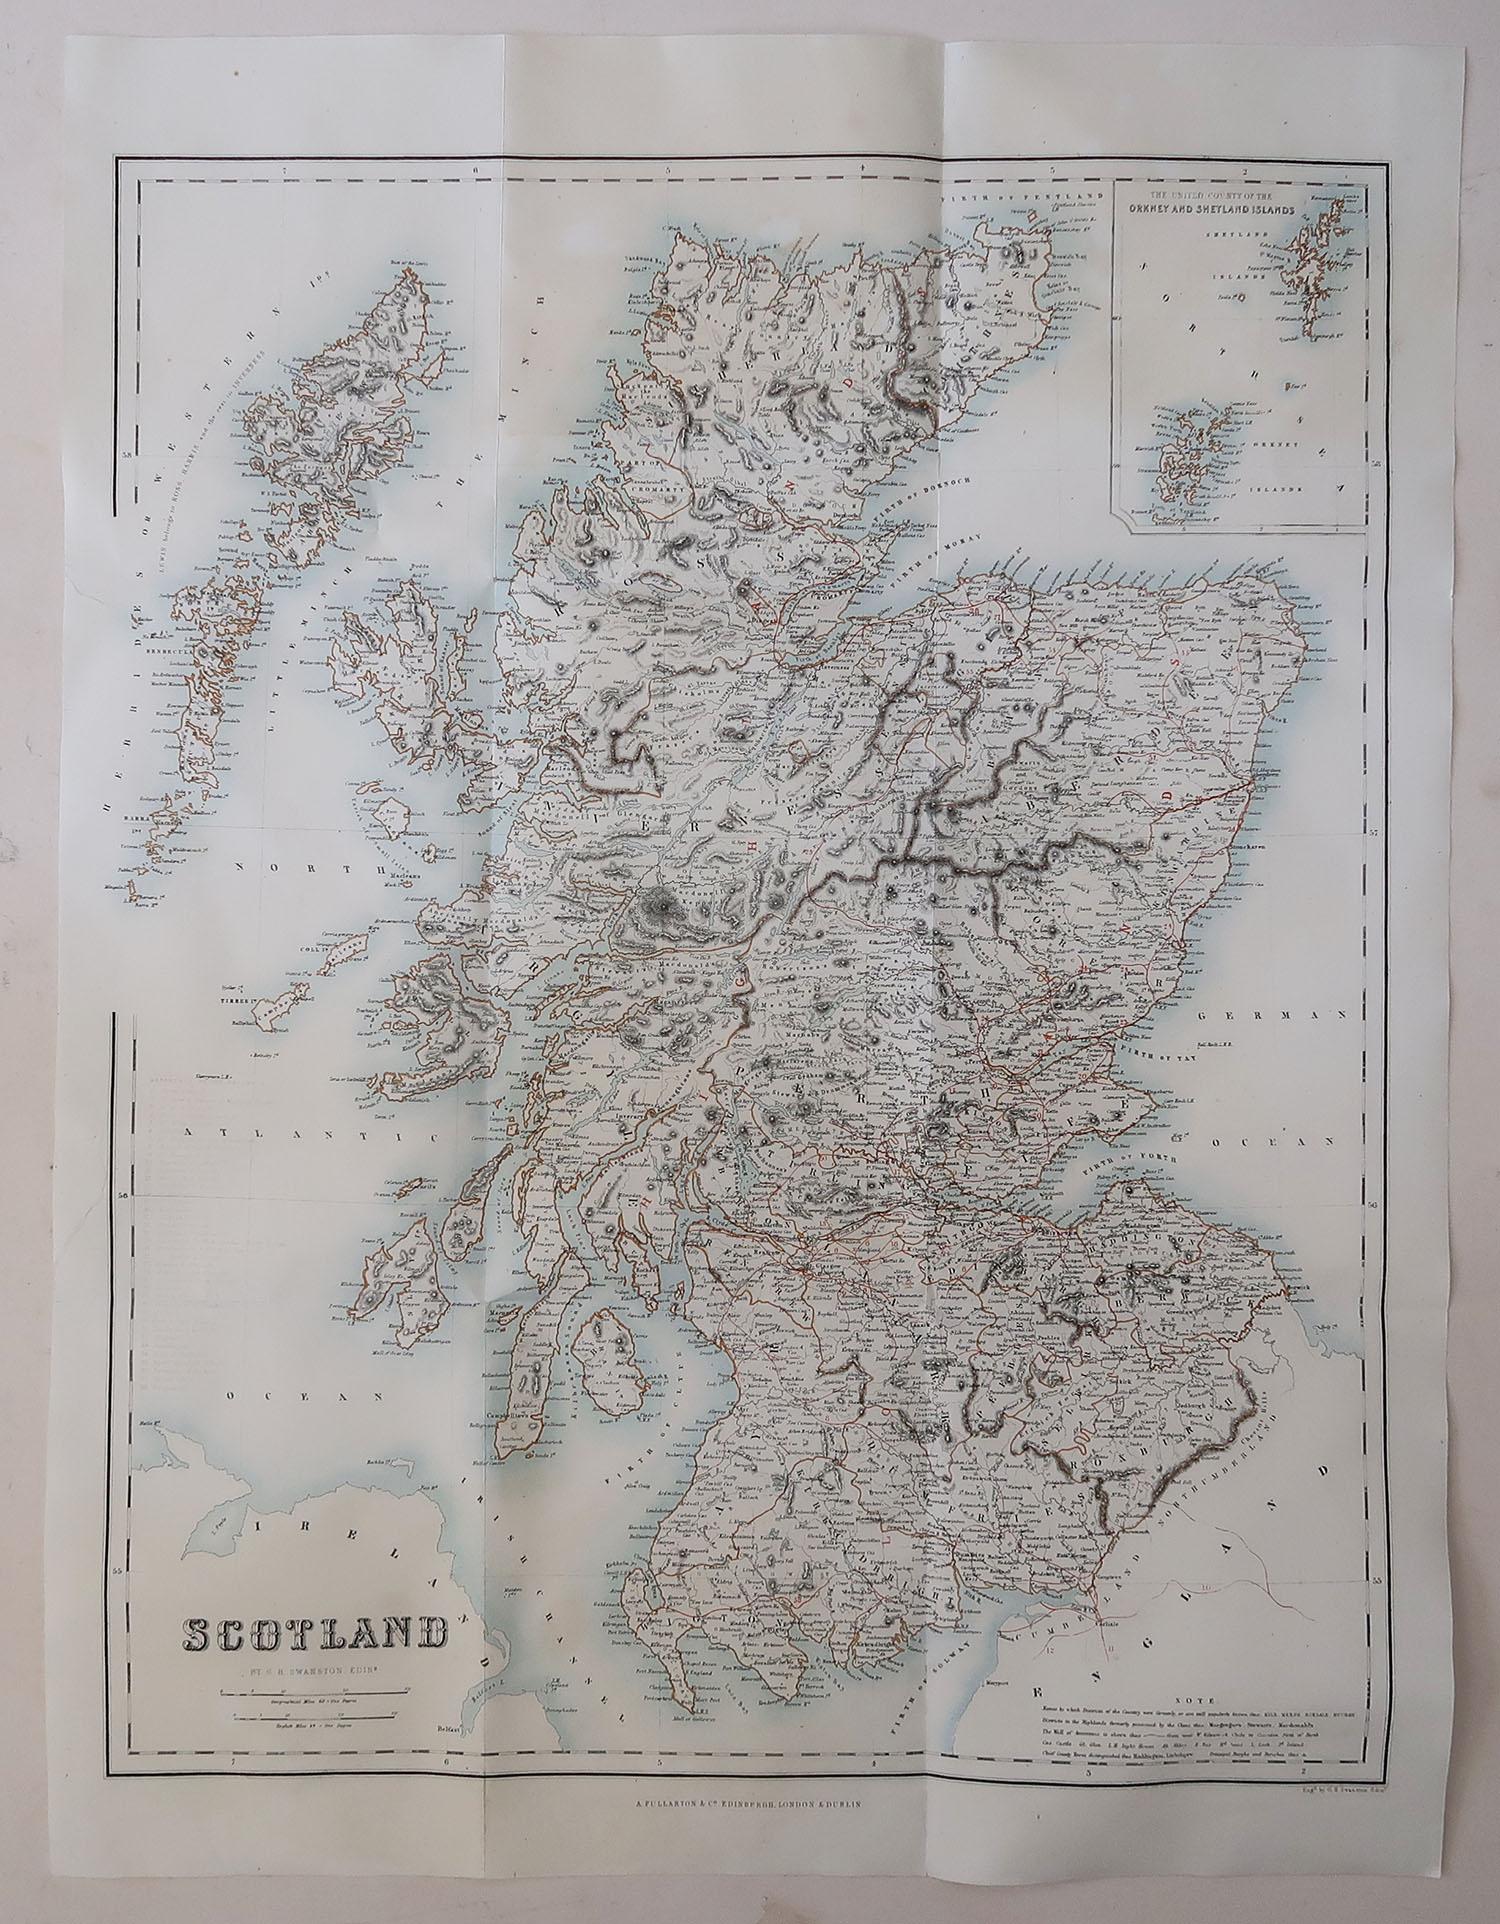 Great map of Scotland

Original color

Good condition / repairs to 2 minor edge tears left side

Engraved by Swanston, Edinburgh

Published by Fullarton, Edinburgh, circa 1870.

Unframed.




  